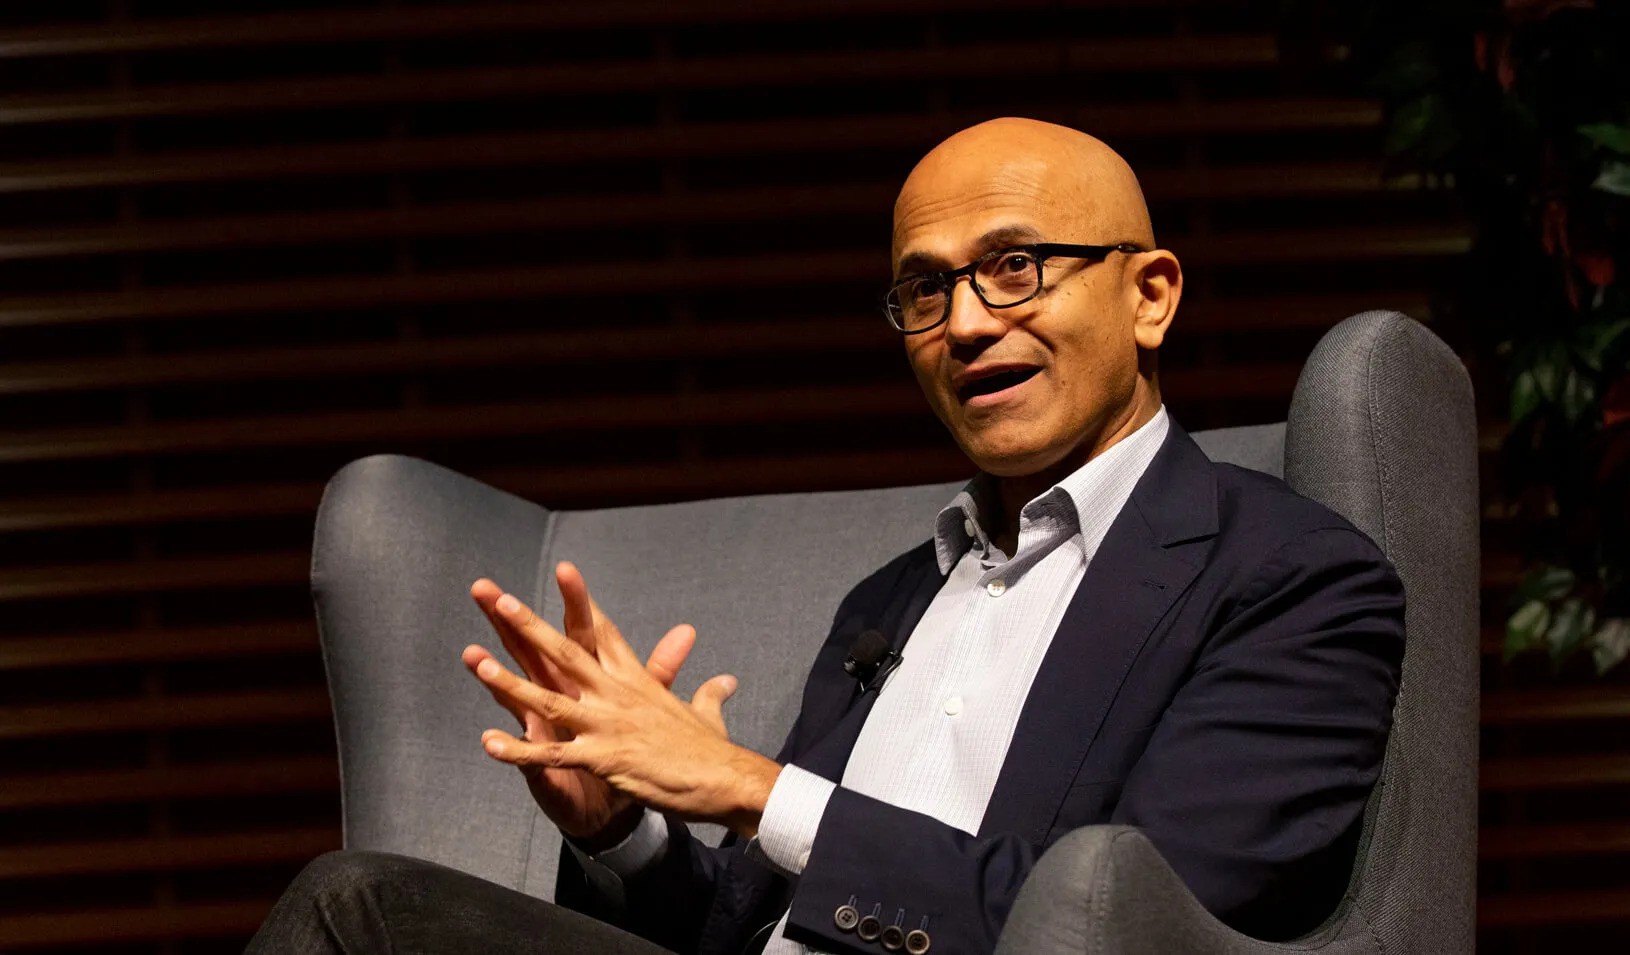 Microsoft CEO Satya Nadella during an interview with Stanford Graduate School of Business (2019).